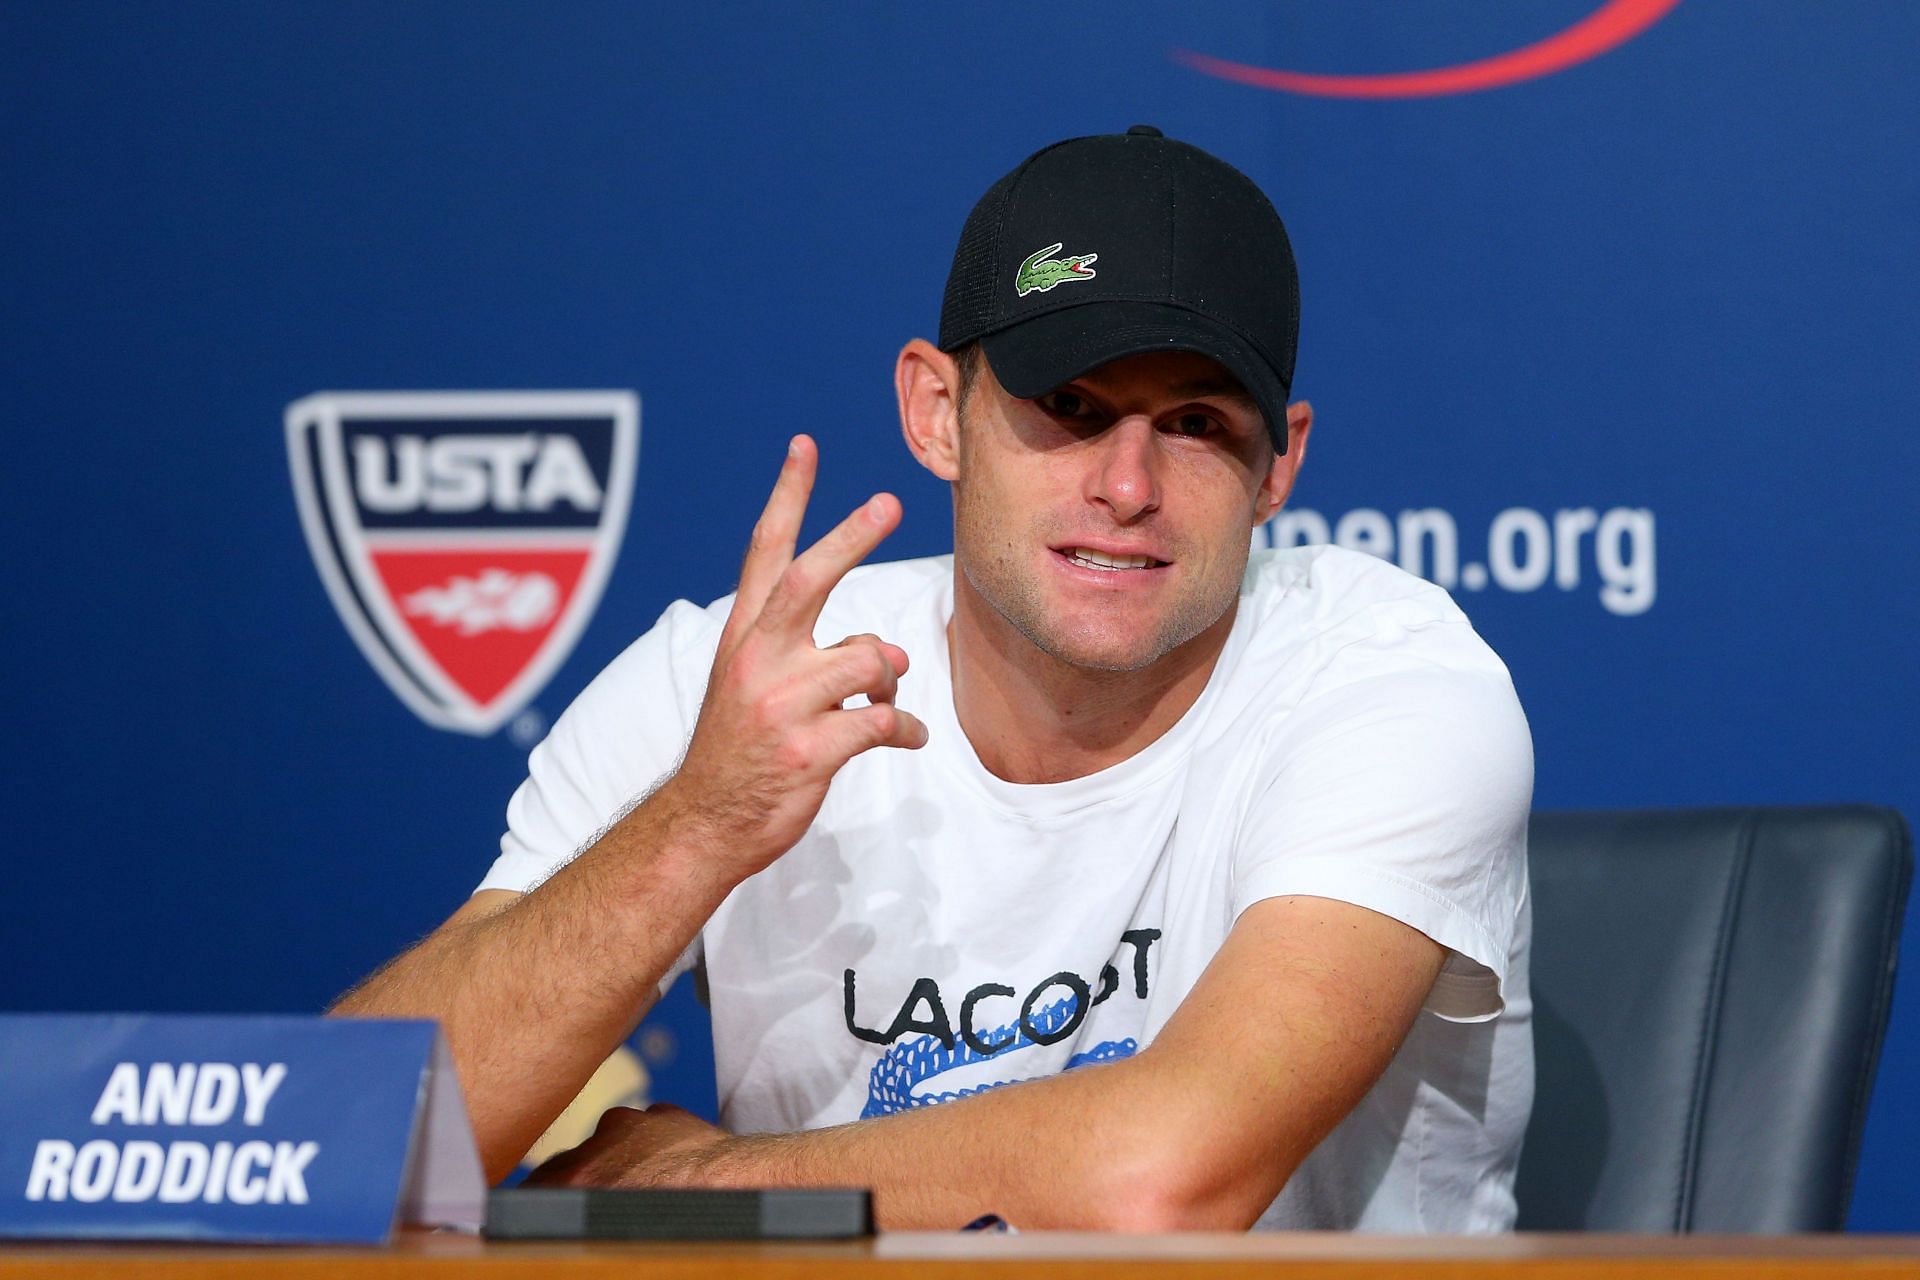 Andy Roddick at the 2012 US Open